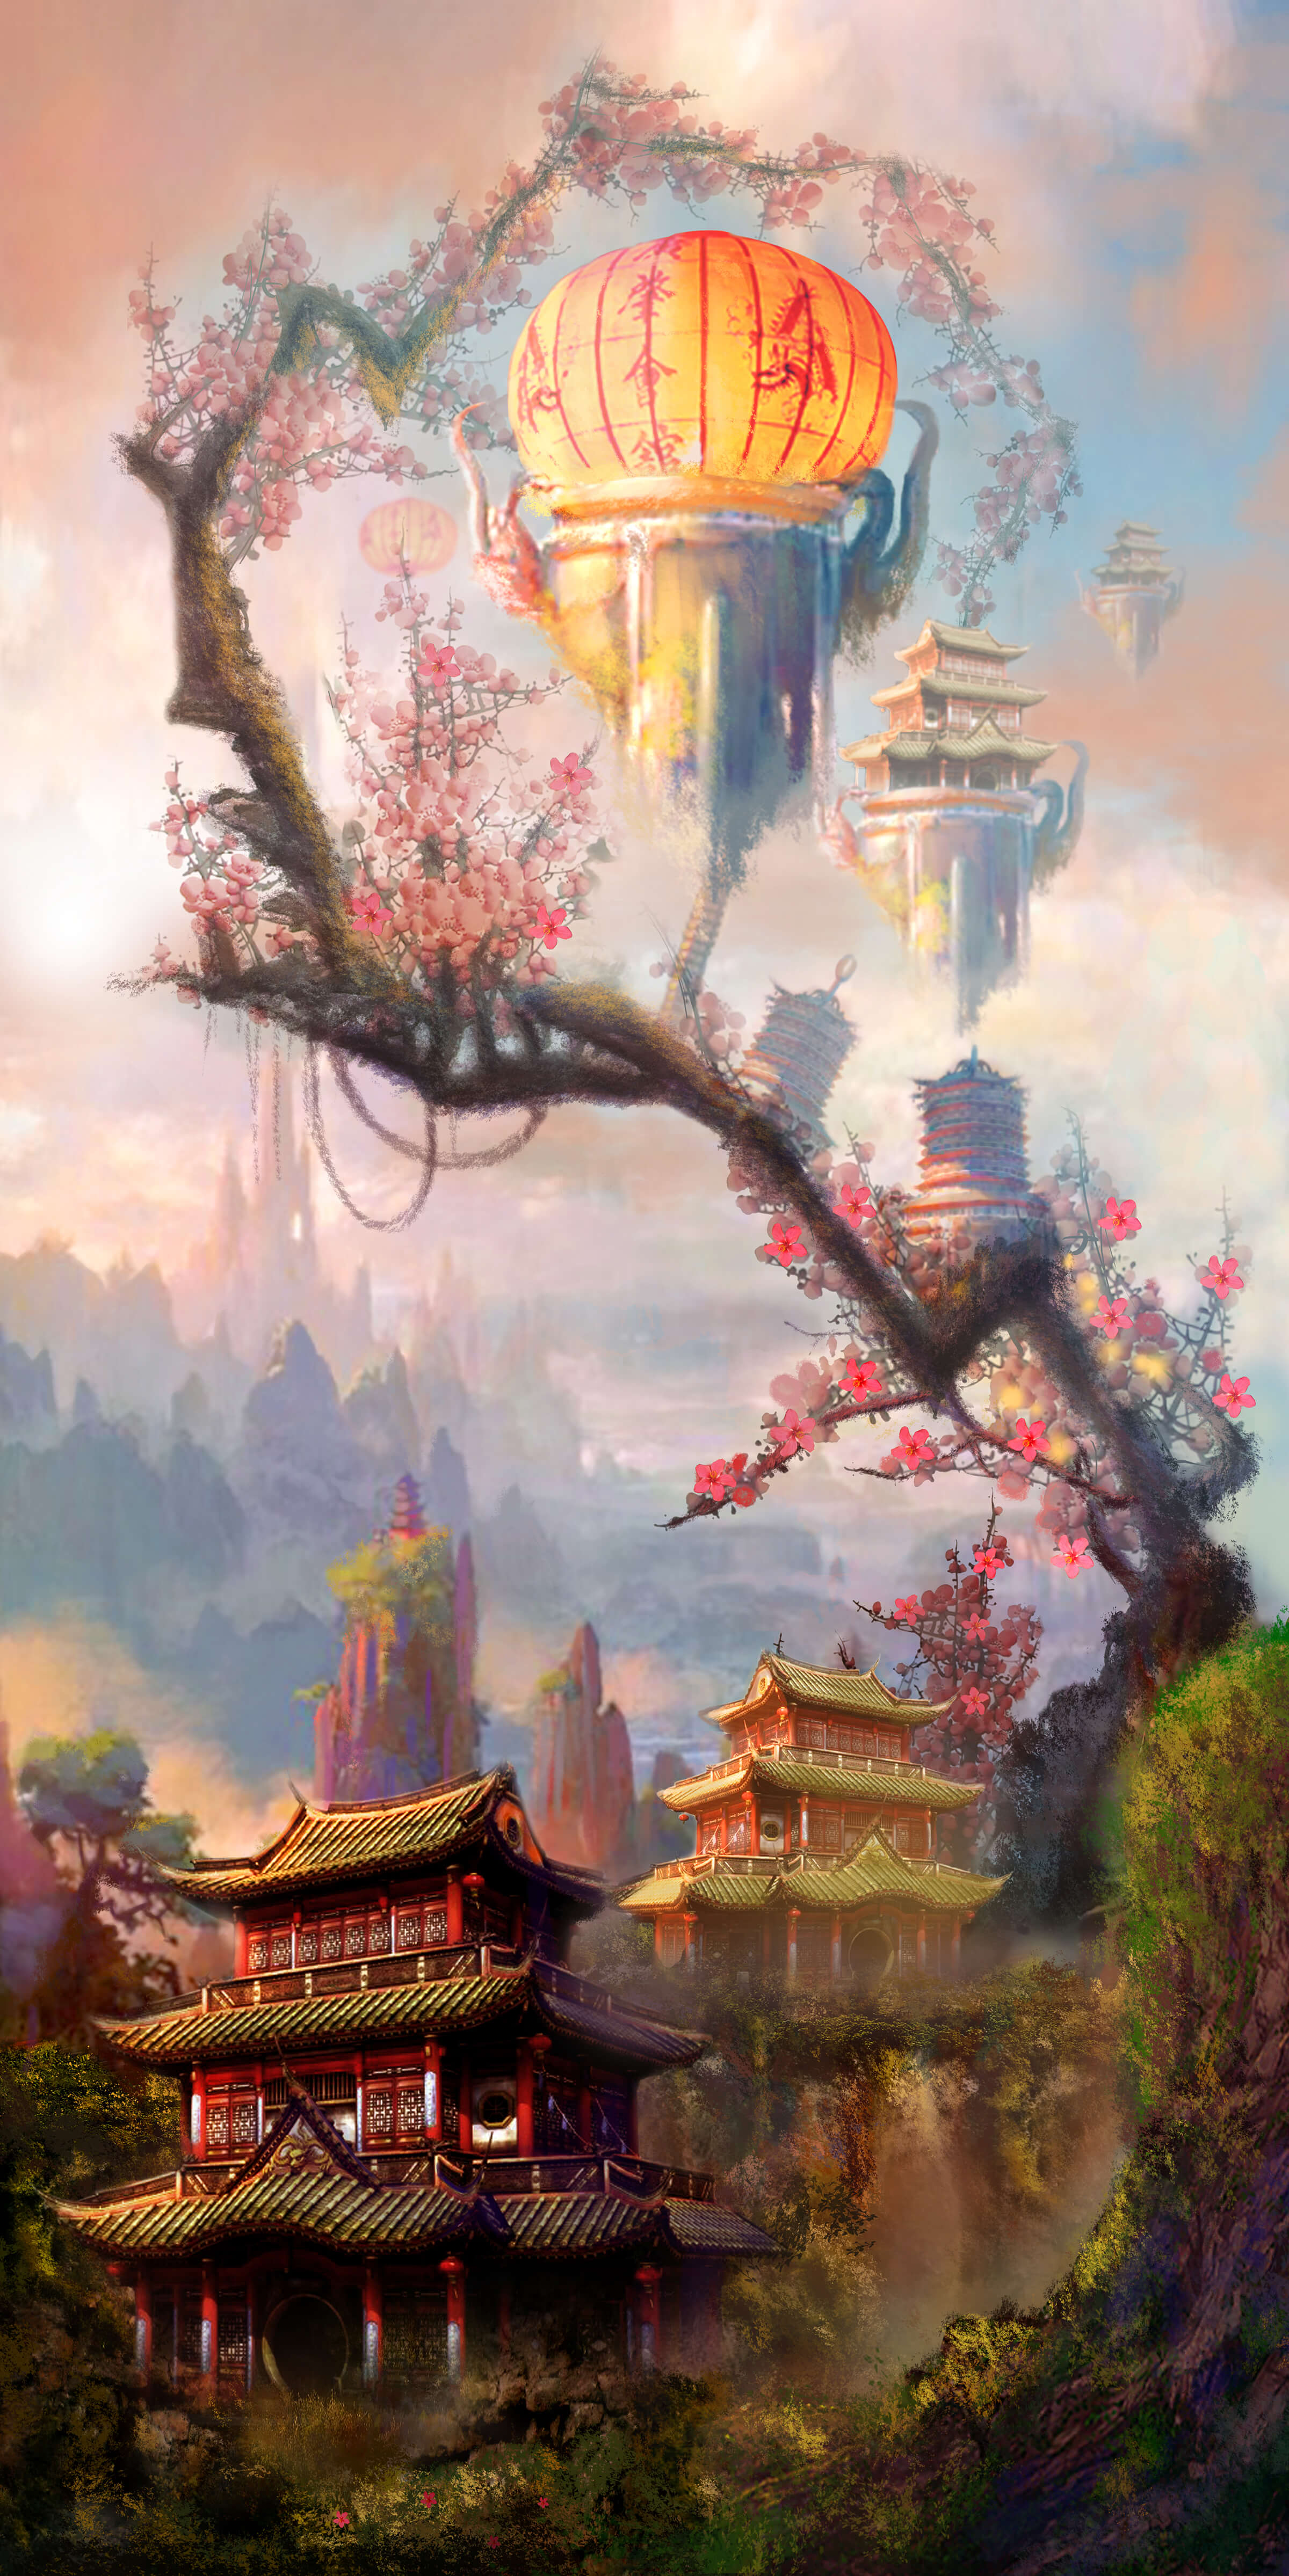 A large, orange paper lantern hovers above a valley of pagoda-style structures, some of which are perched on a blooming tree.